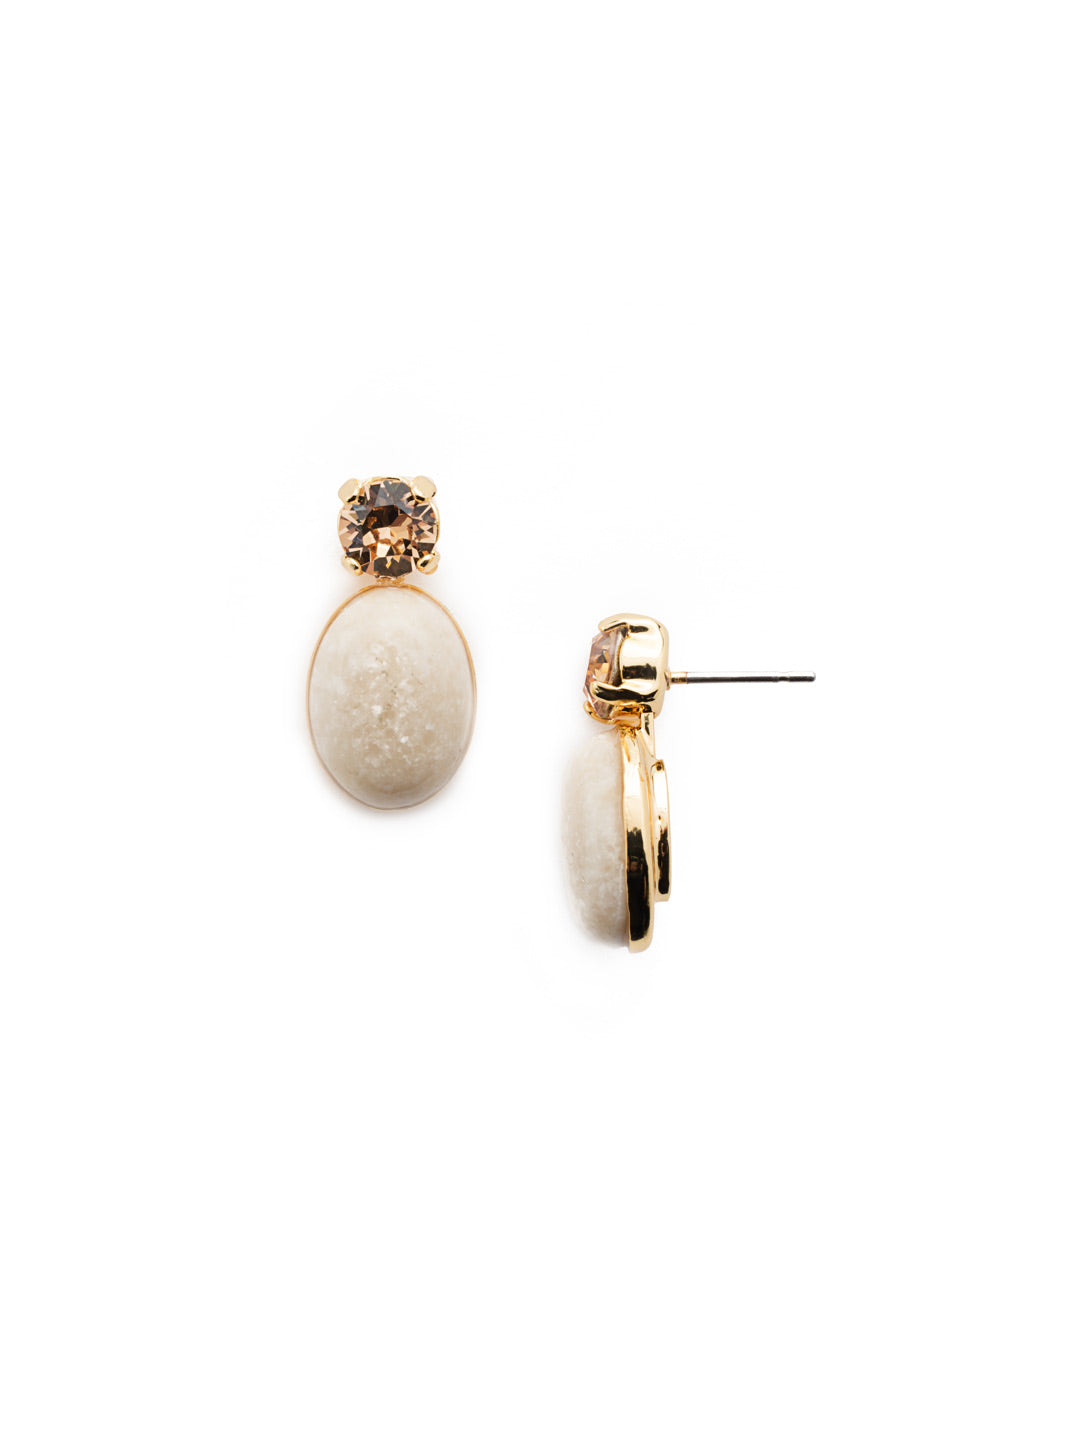 Briella Dangle Earrings - EEP500BGPCO - Simple, yet classic. The oval shaped crystal hangs beautifully from a round crystal post. From Sorrelli's Limoncello collection in our Bright Gold-tone finish.